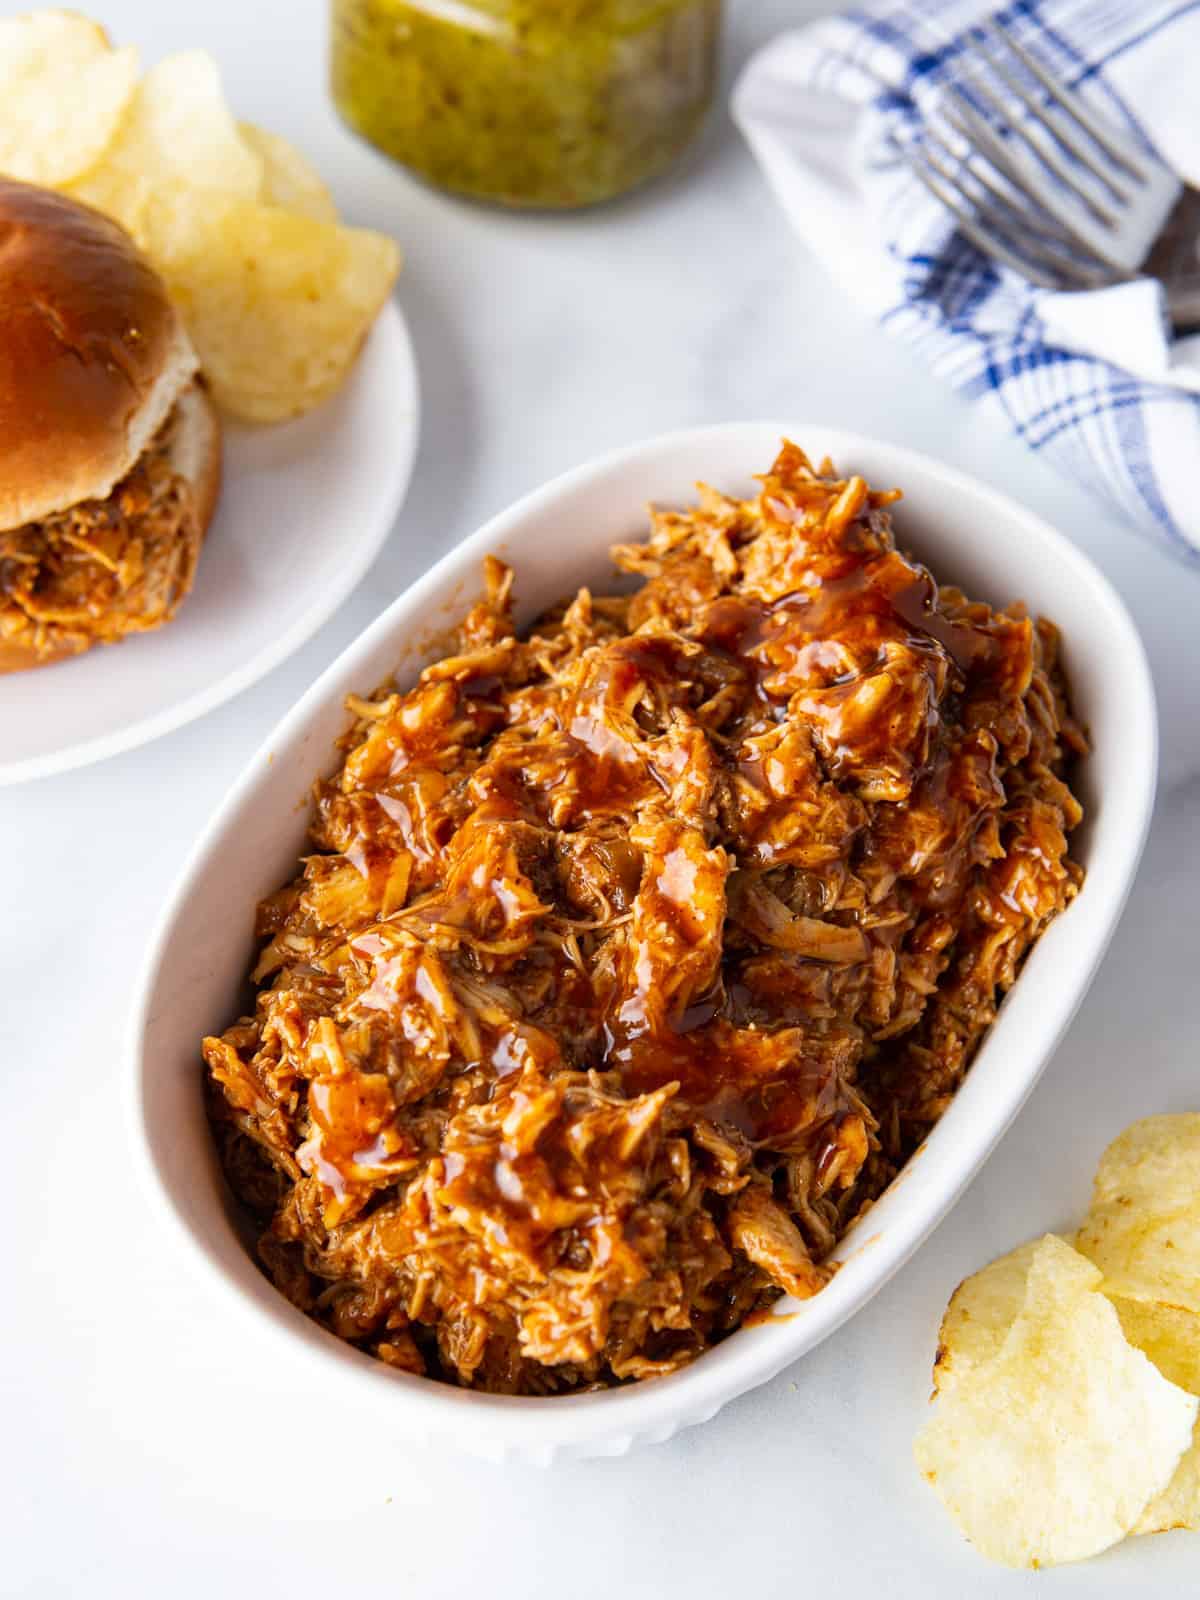 Serving dish with barbecue pulled chicken. On the side is a pulled chicken sandwich on a plate with potato chip.